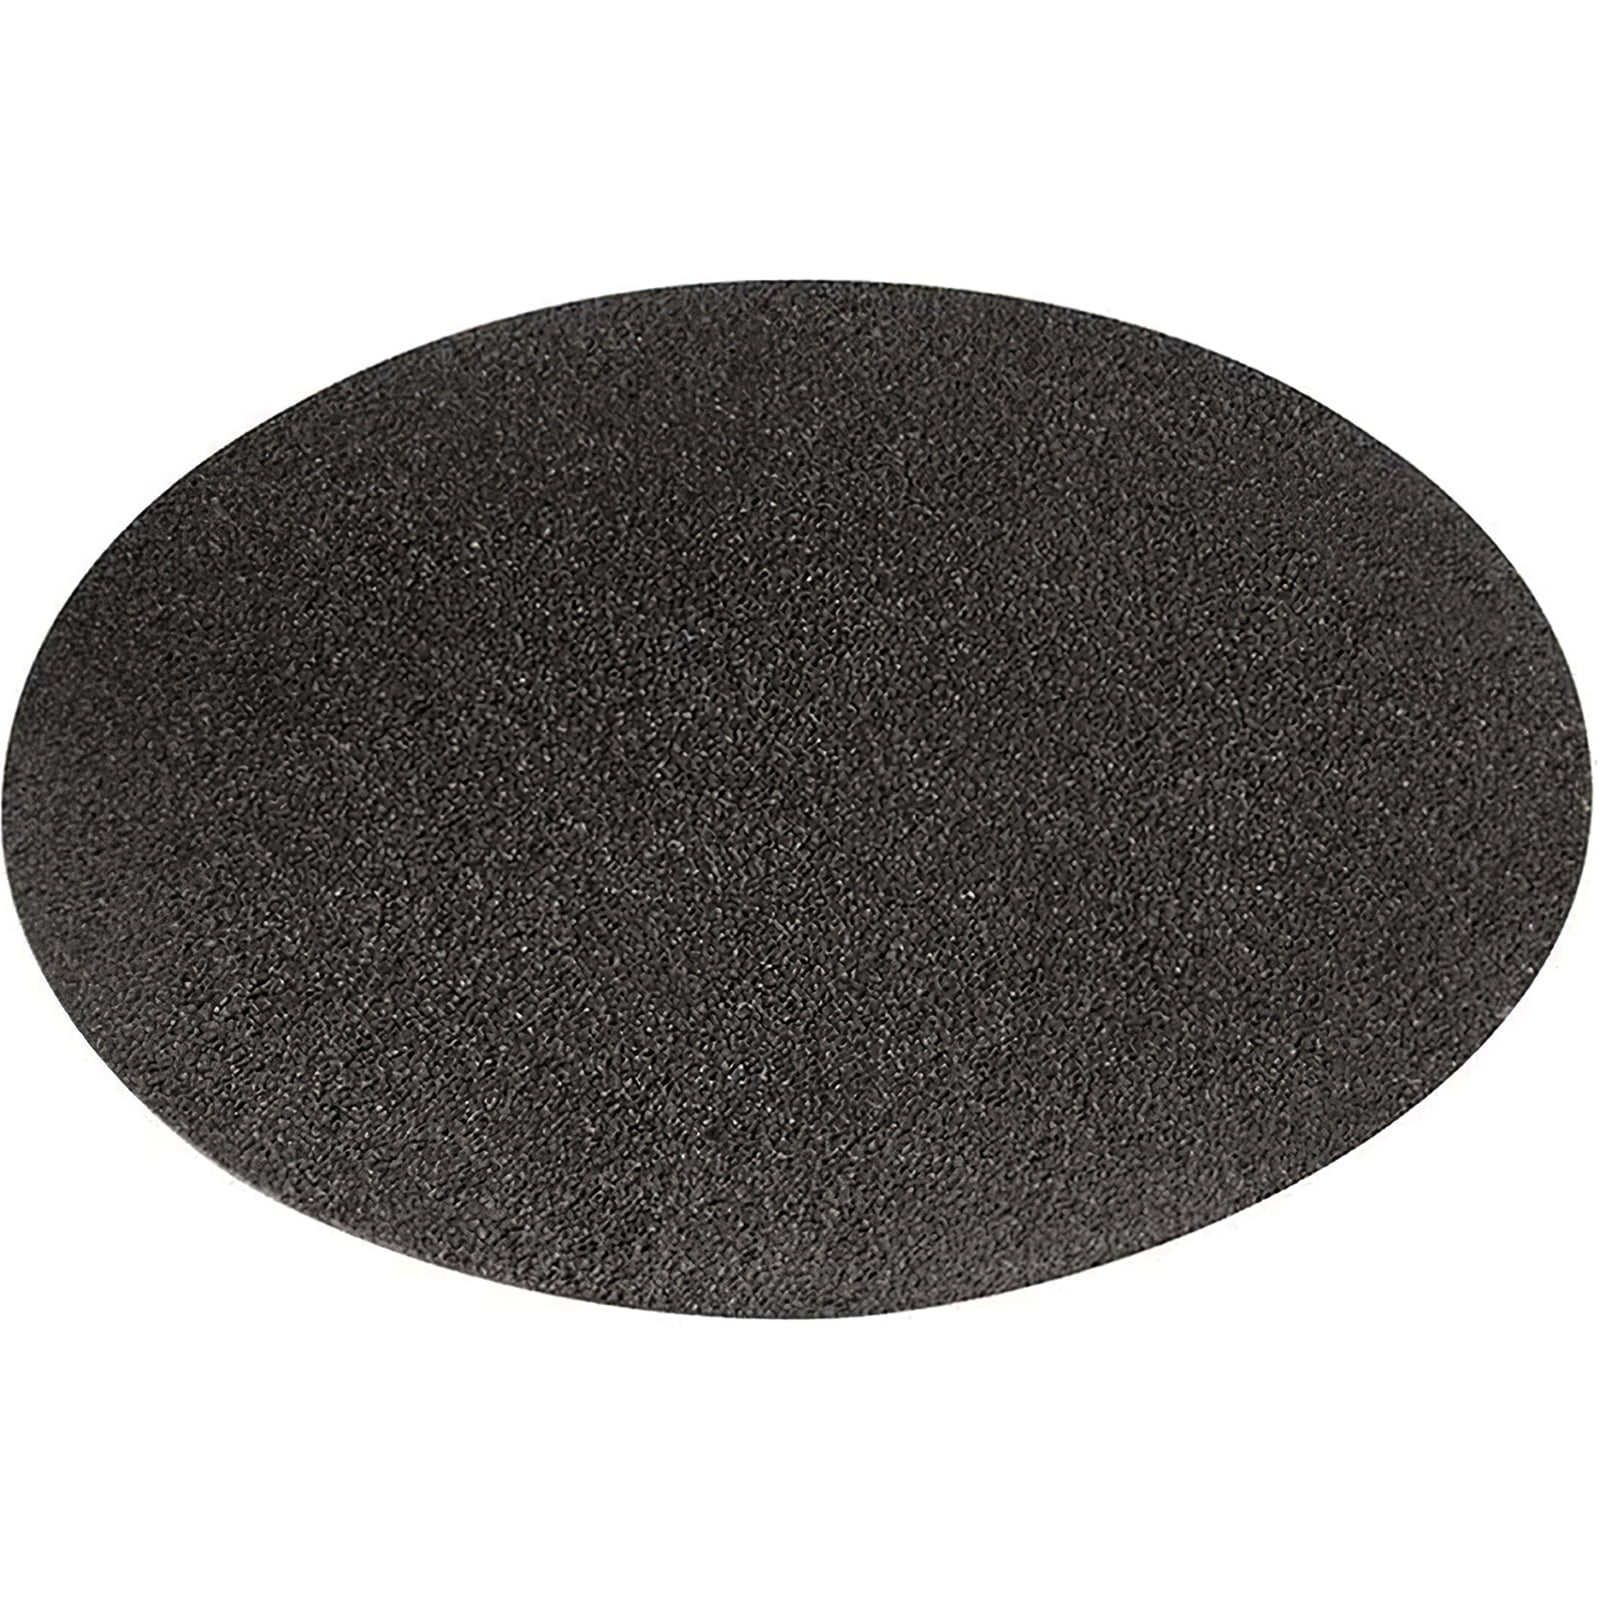 ANGGREK BBQ Floor Protective Mat for Home Party Use Round Shape Gary Barbecue Mat Oil Resistant 36in 